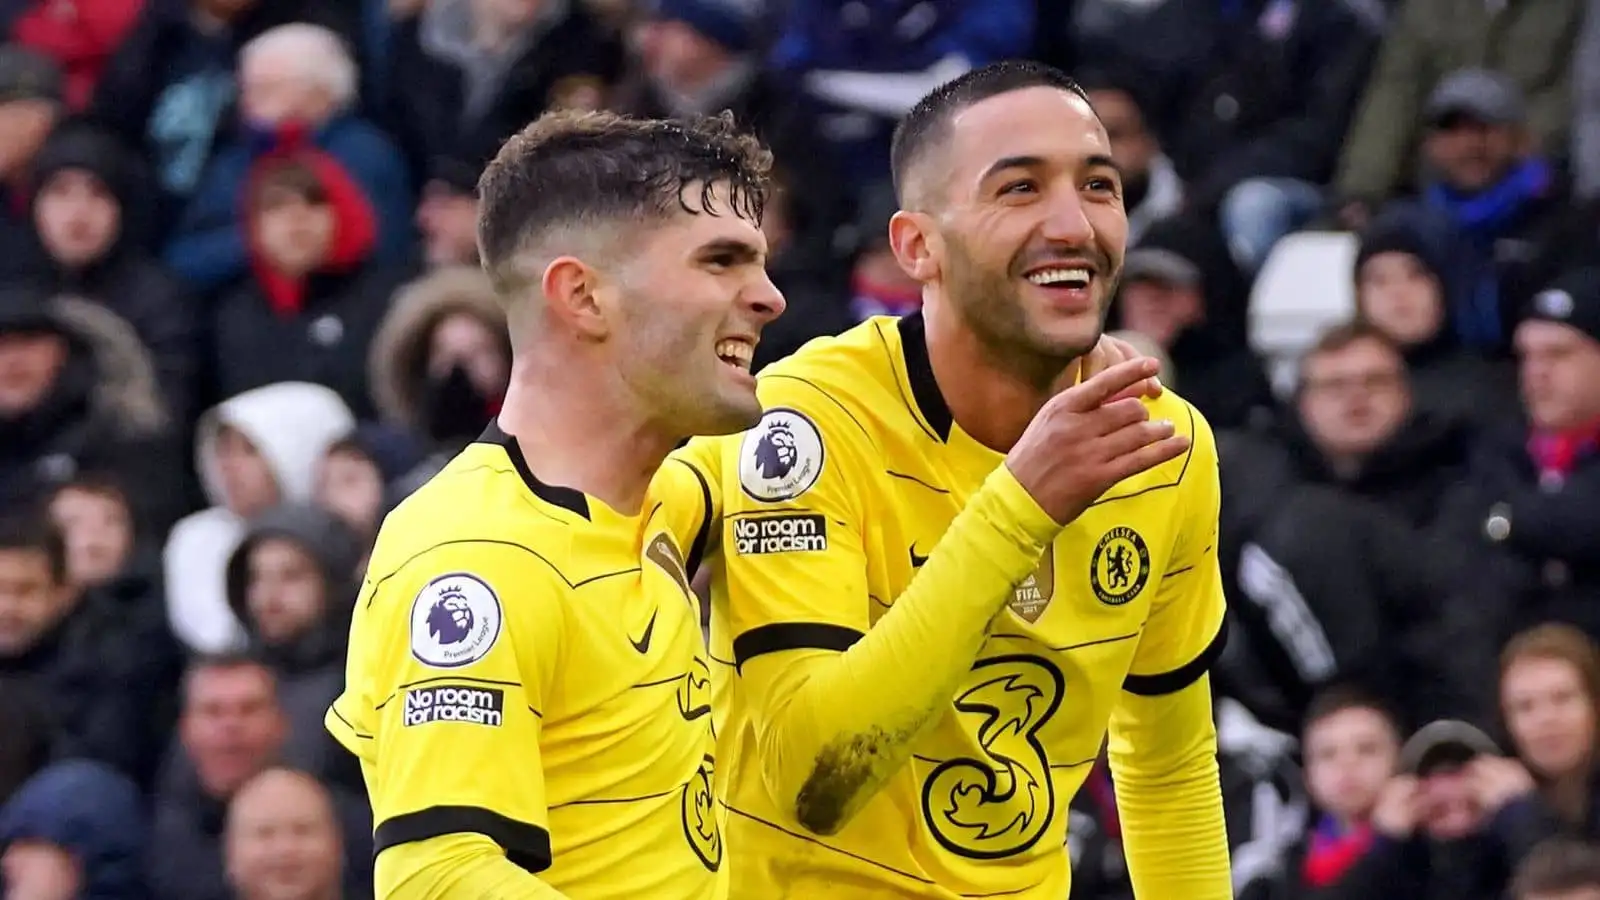 Hakim Ziyech celebrates scoring their side's first goal of the game with team-mate Christian Pulisic before it is ruled out by VAR during the Premier League match at Selhurst Park, London